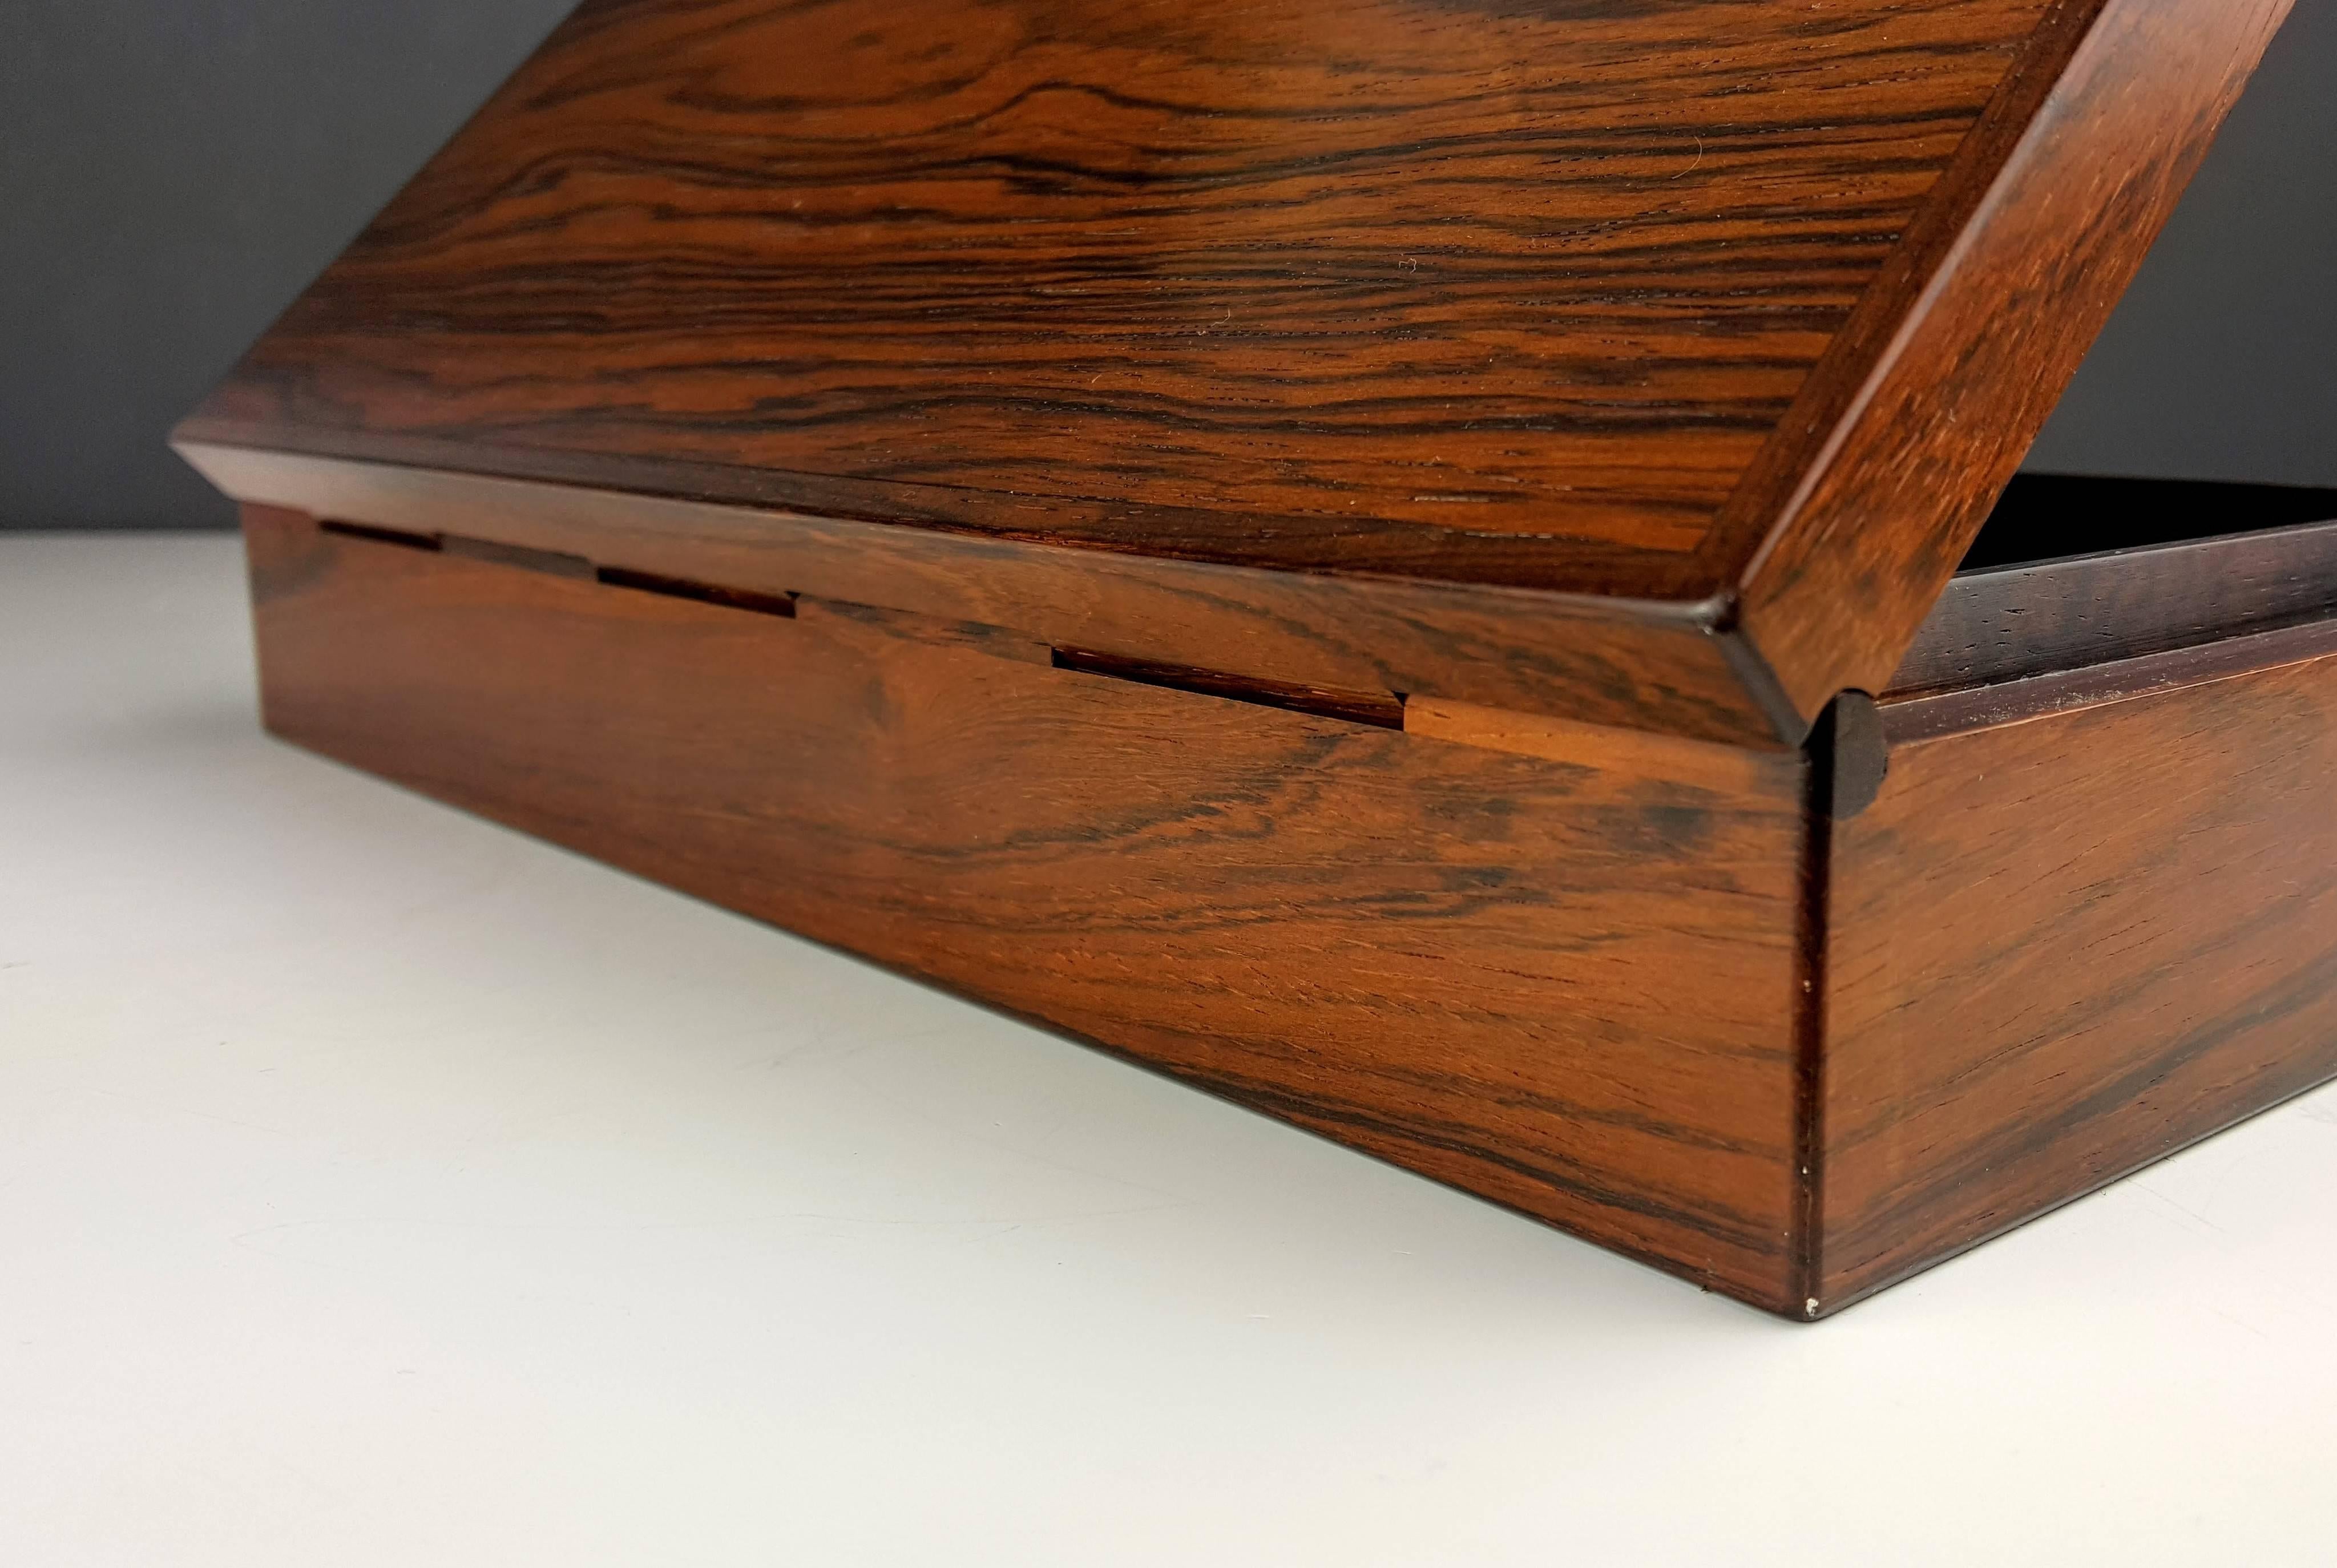 Rosewood dresser box by Alfred Klitgaard, Denmark, 1950s.

See this item in our private NYC showroom! Refine Limited is located in the heart of Chelsea at the history Starrett-LeHigh Building, 601 West 26th Street, Suite M258. Please call us to